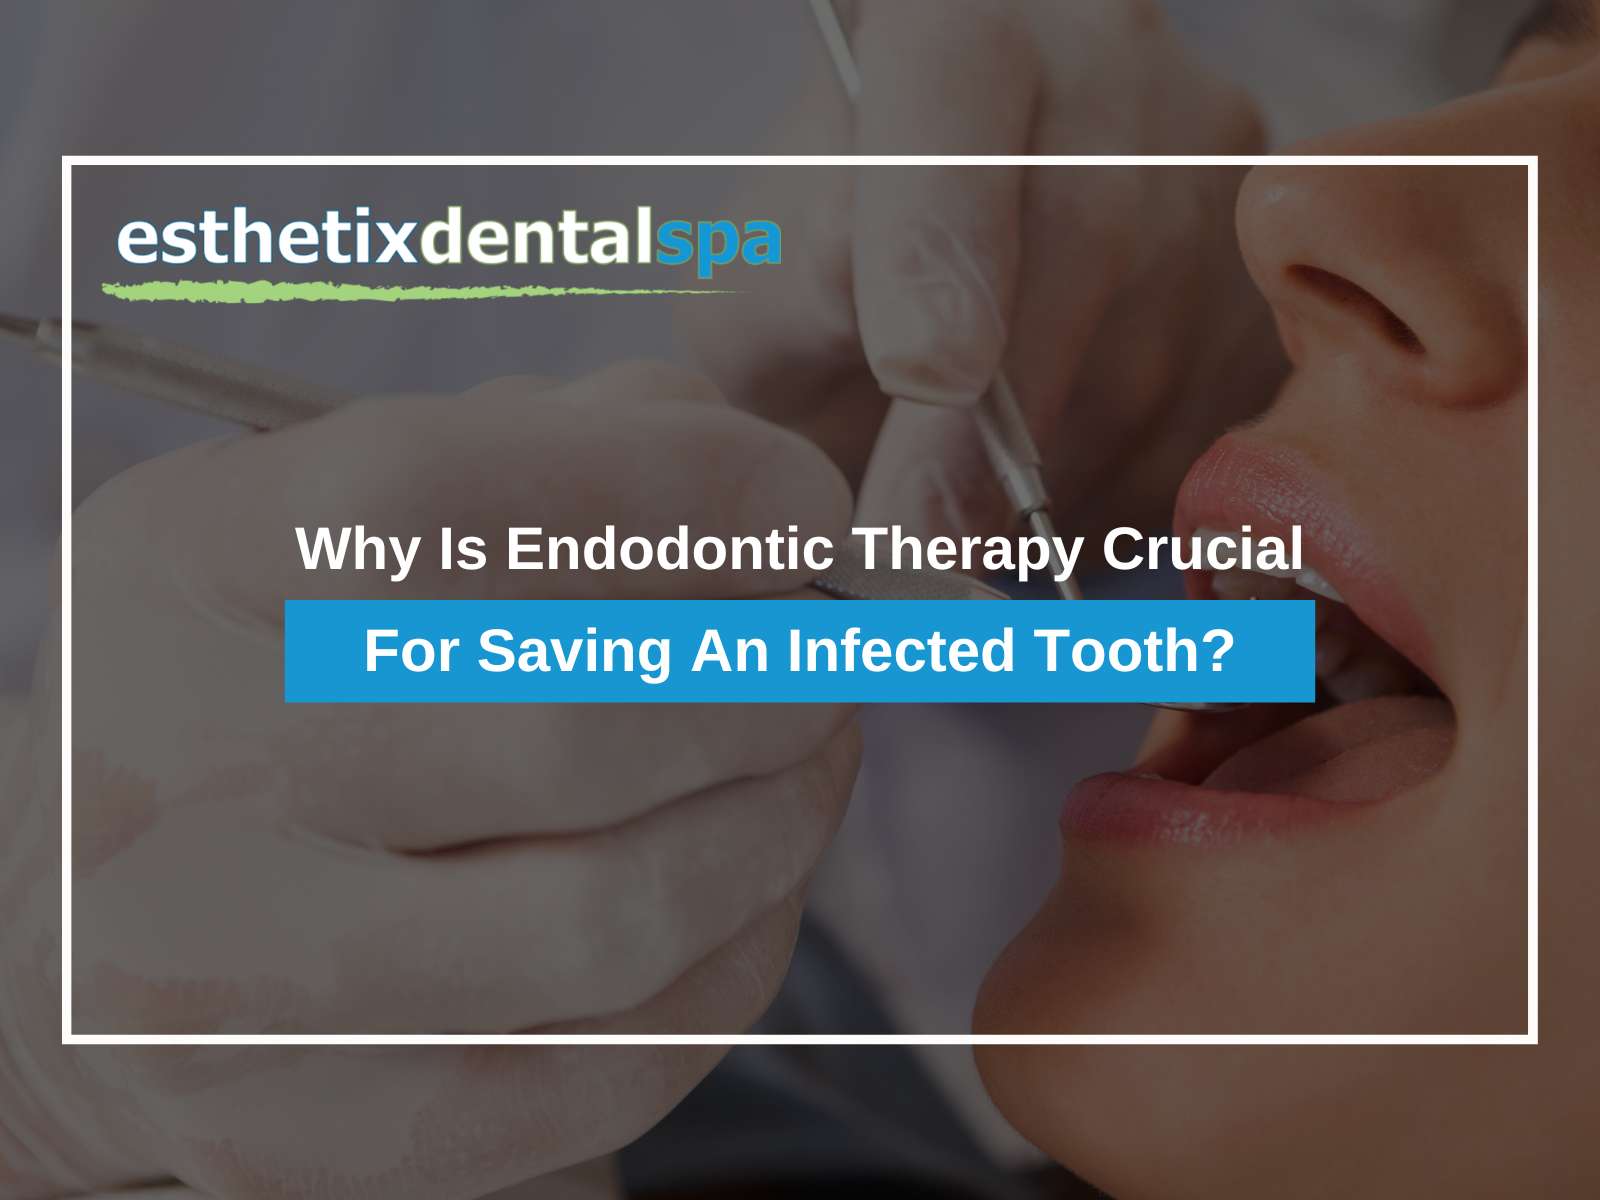 Why Is Endodontic Therapy Crucial For Saving An Infected Tooth?